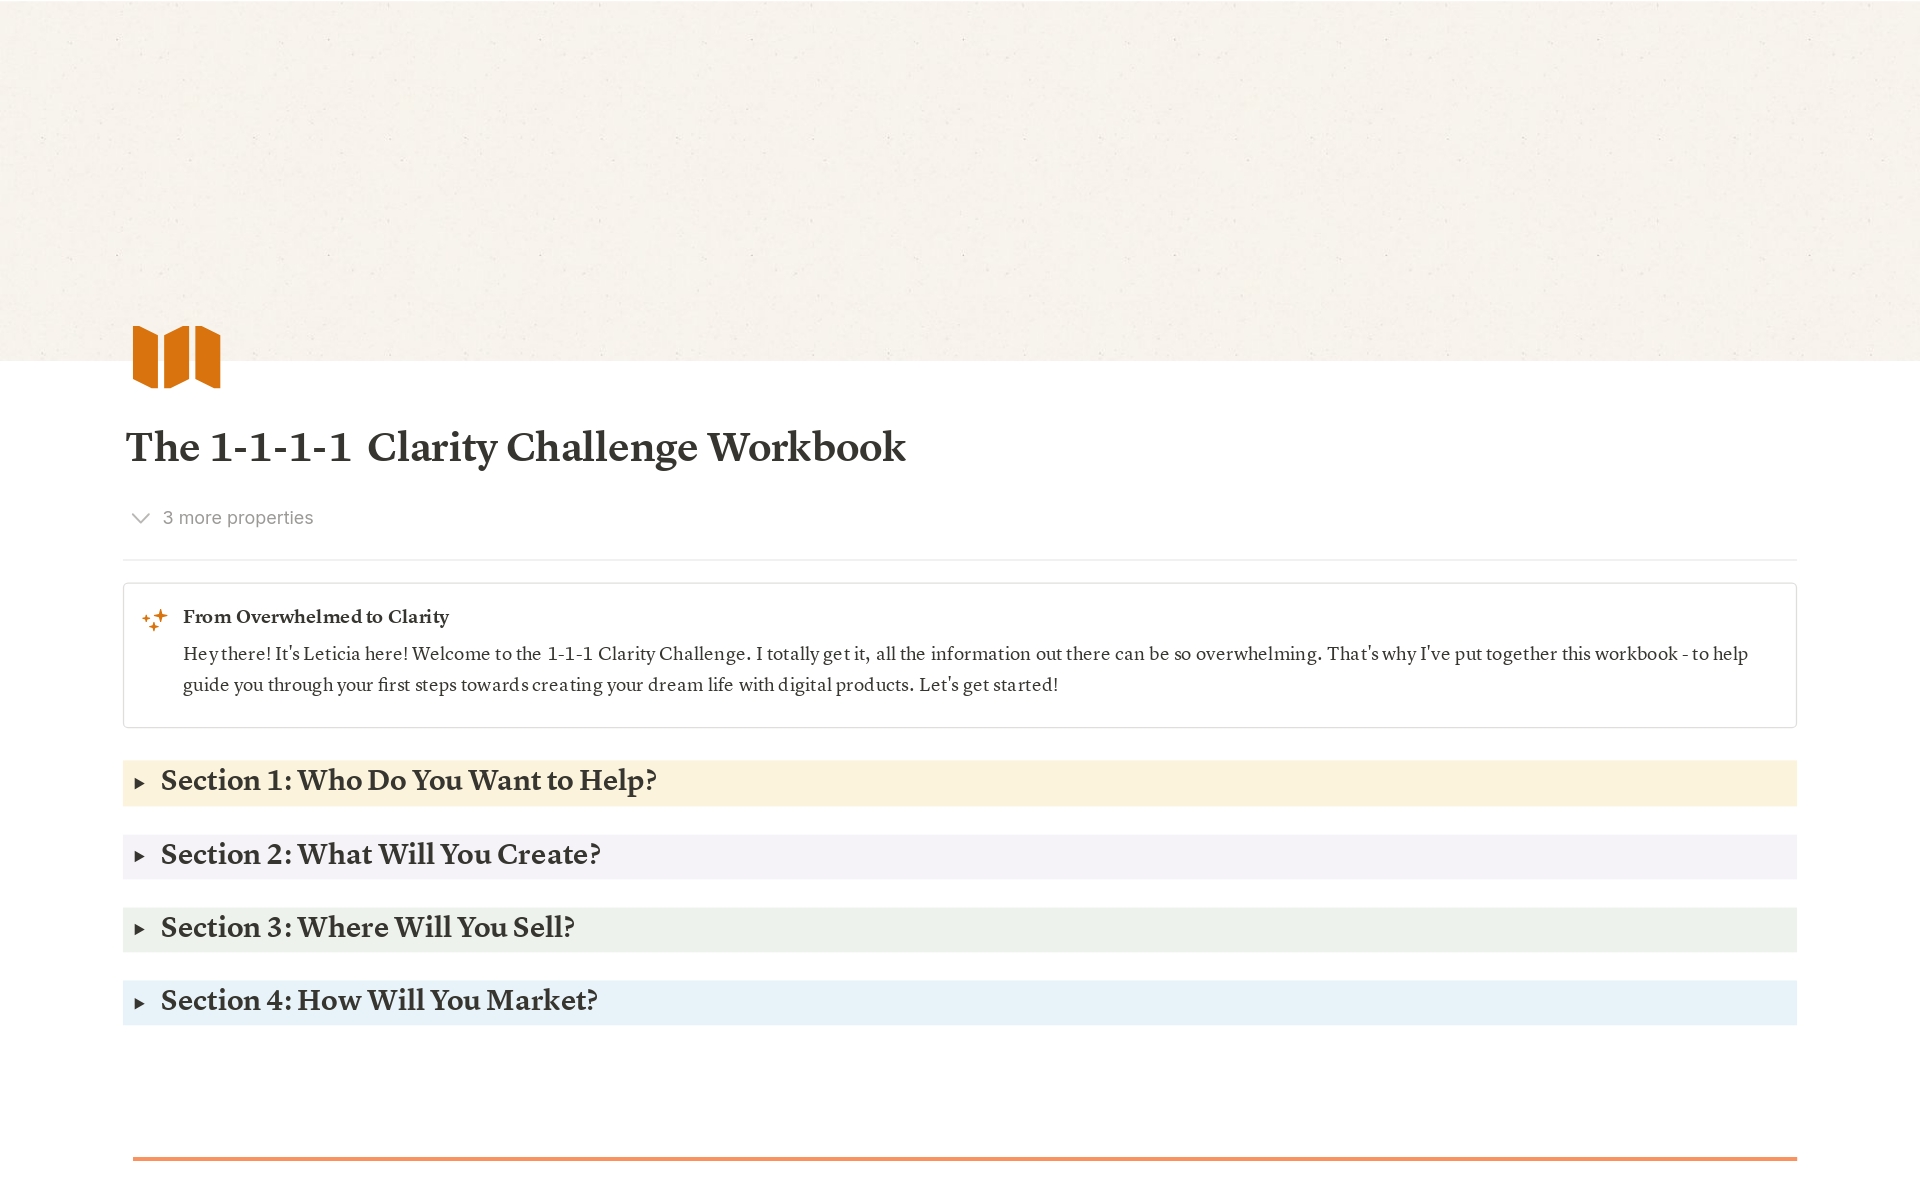 Break free from the overwhelm with our 1-1-1 Clarity Challenge. This free guide helps you identify your ideal customer, define your unique digital product, choose your selling platform, and develop effective marketing strategies.